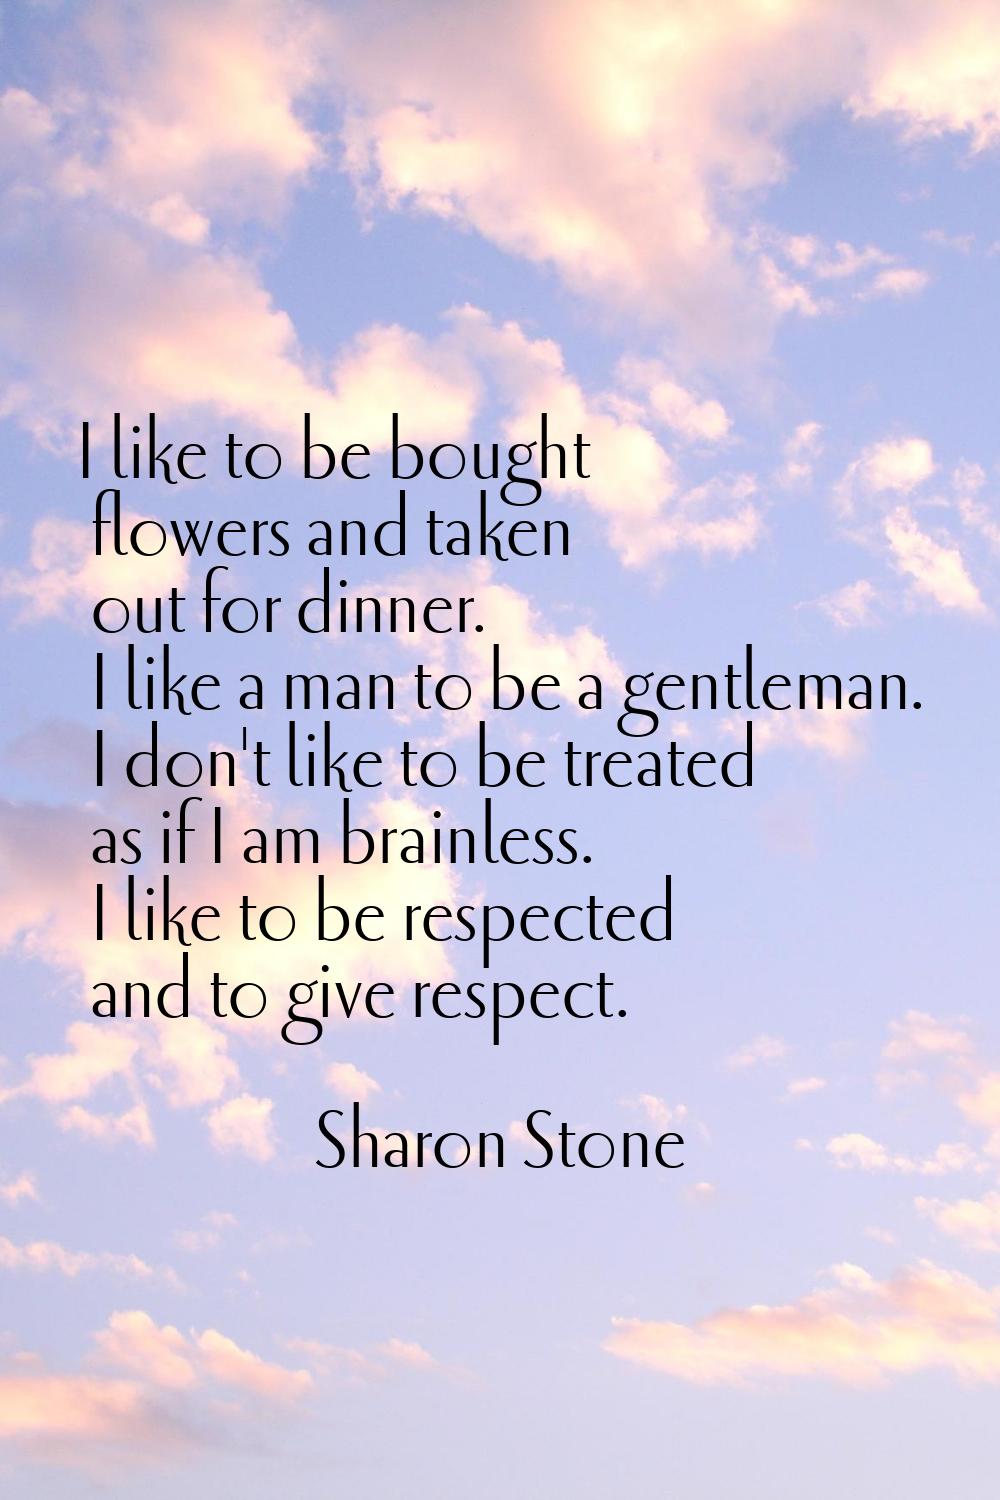 I like to be bought flowers and taken out for dinner. I like a man to be a gentleman. I don't like 